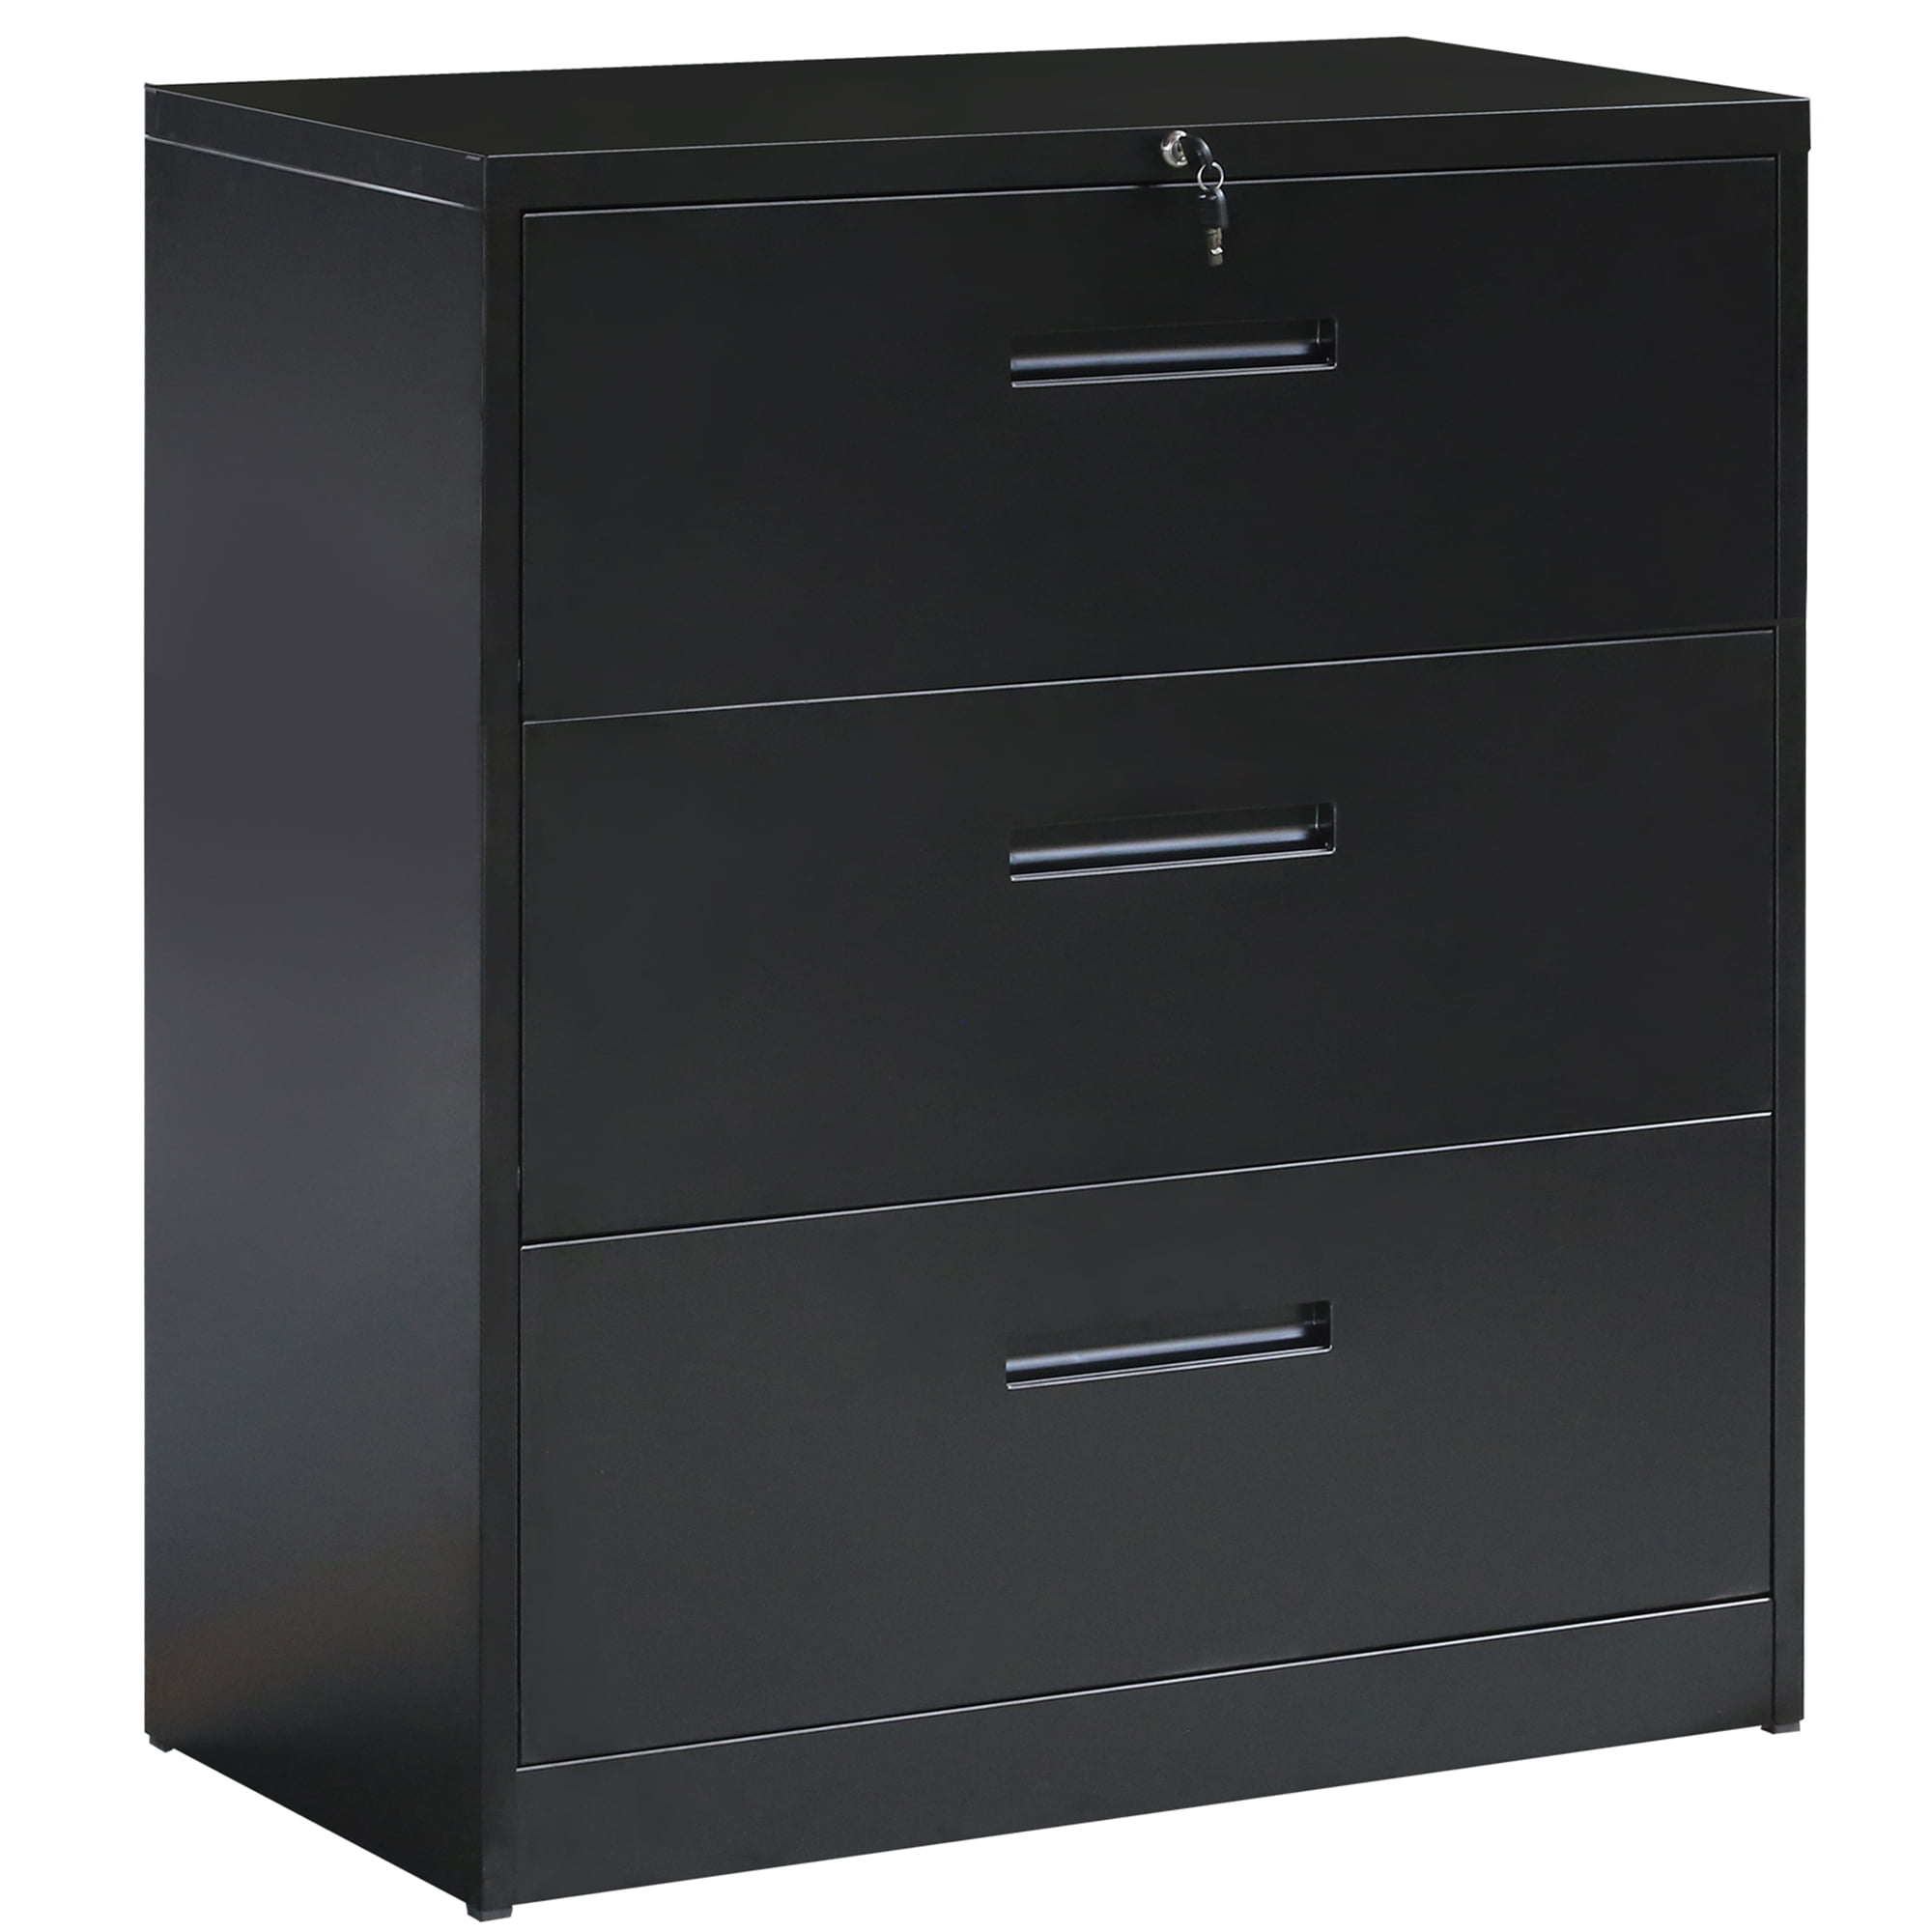 4 Drawer lateral File Cabinet Black Lockable Filing Cabinet Metal Organizer Heavy Duty Hanging File Office Home Storage